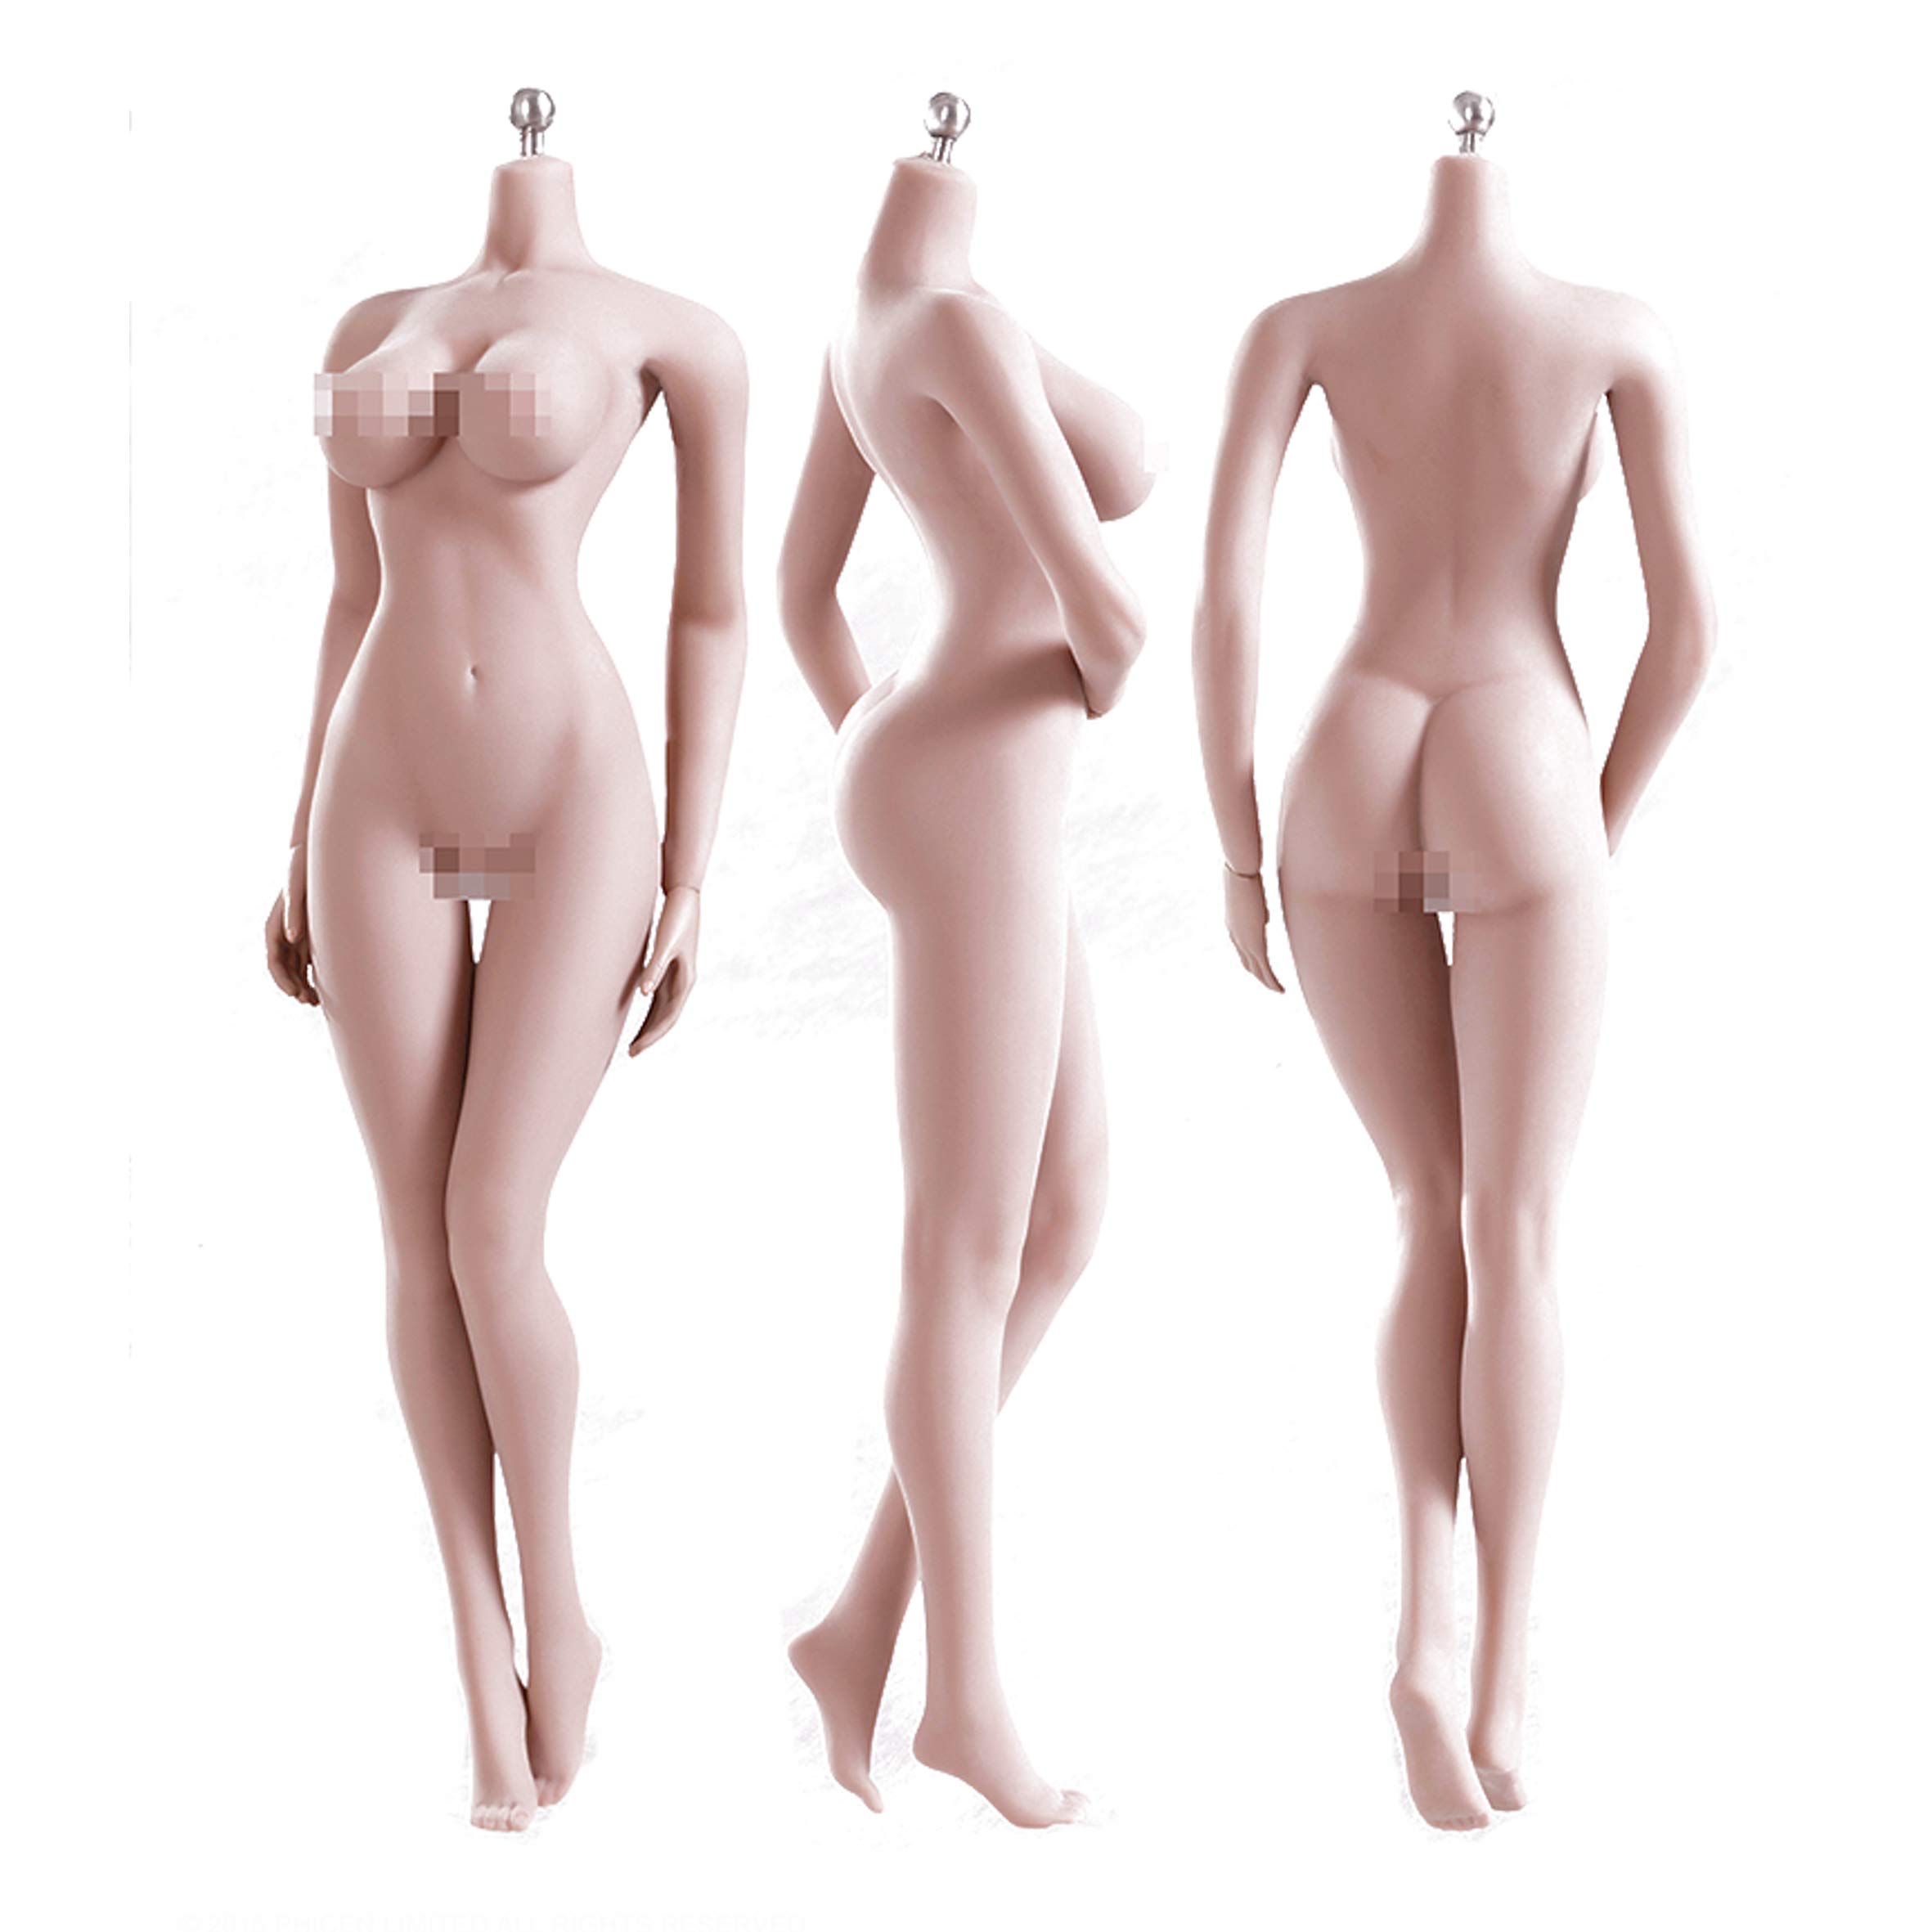 HiPlay TBLeague 1/6 Scale 12 inch Female Super Flexible Seamless Figure Body, Standard Body Type, Minature Collectible Action Figures (Pale Skin, S04B)